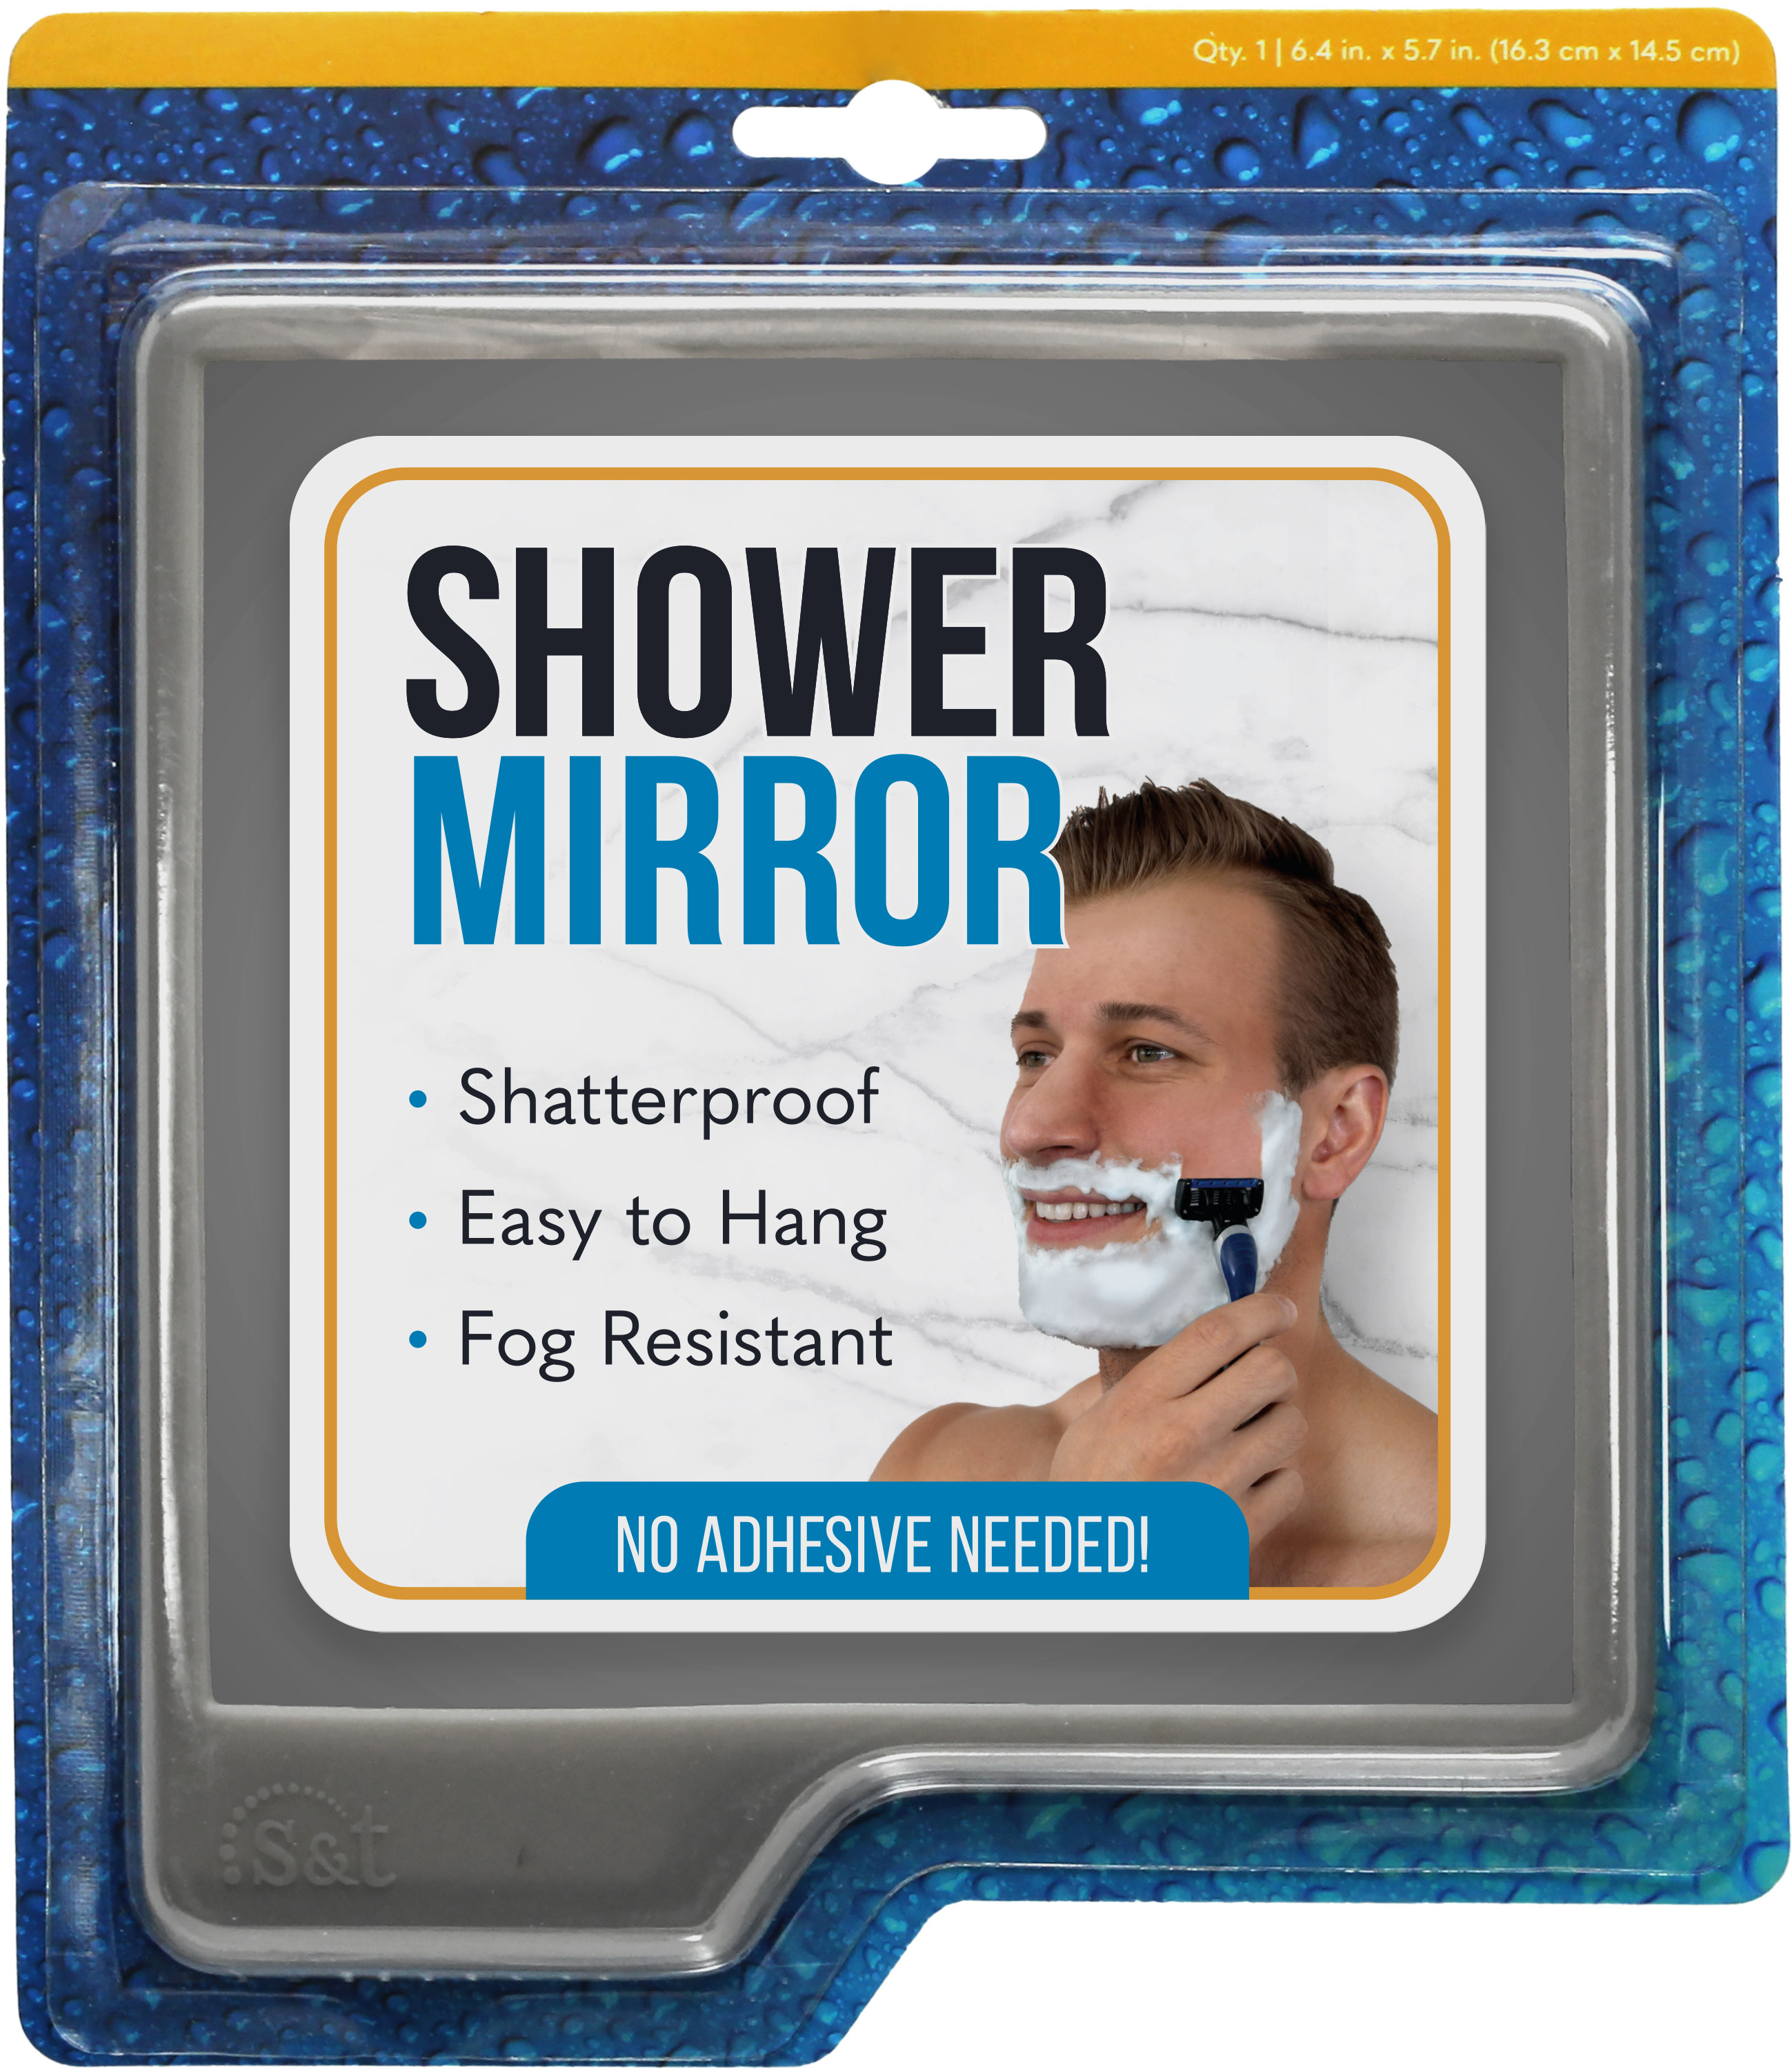 S&T INC. Silicone Shower Mirror, 6.4 inch x 5.7 inch, Shatterproof, Assorted Colors, Non-Adhesive - image 4 of 5